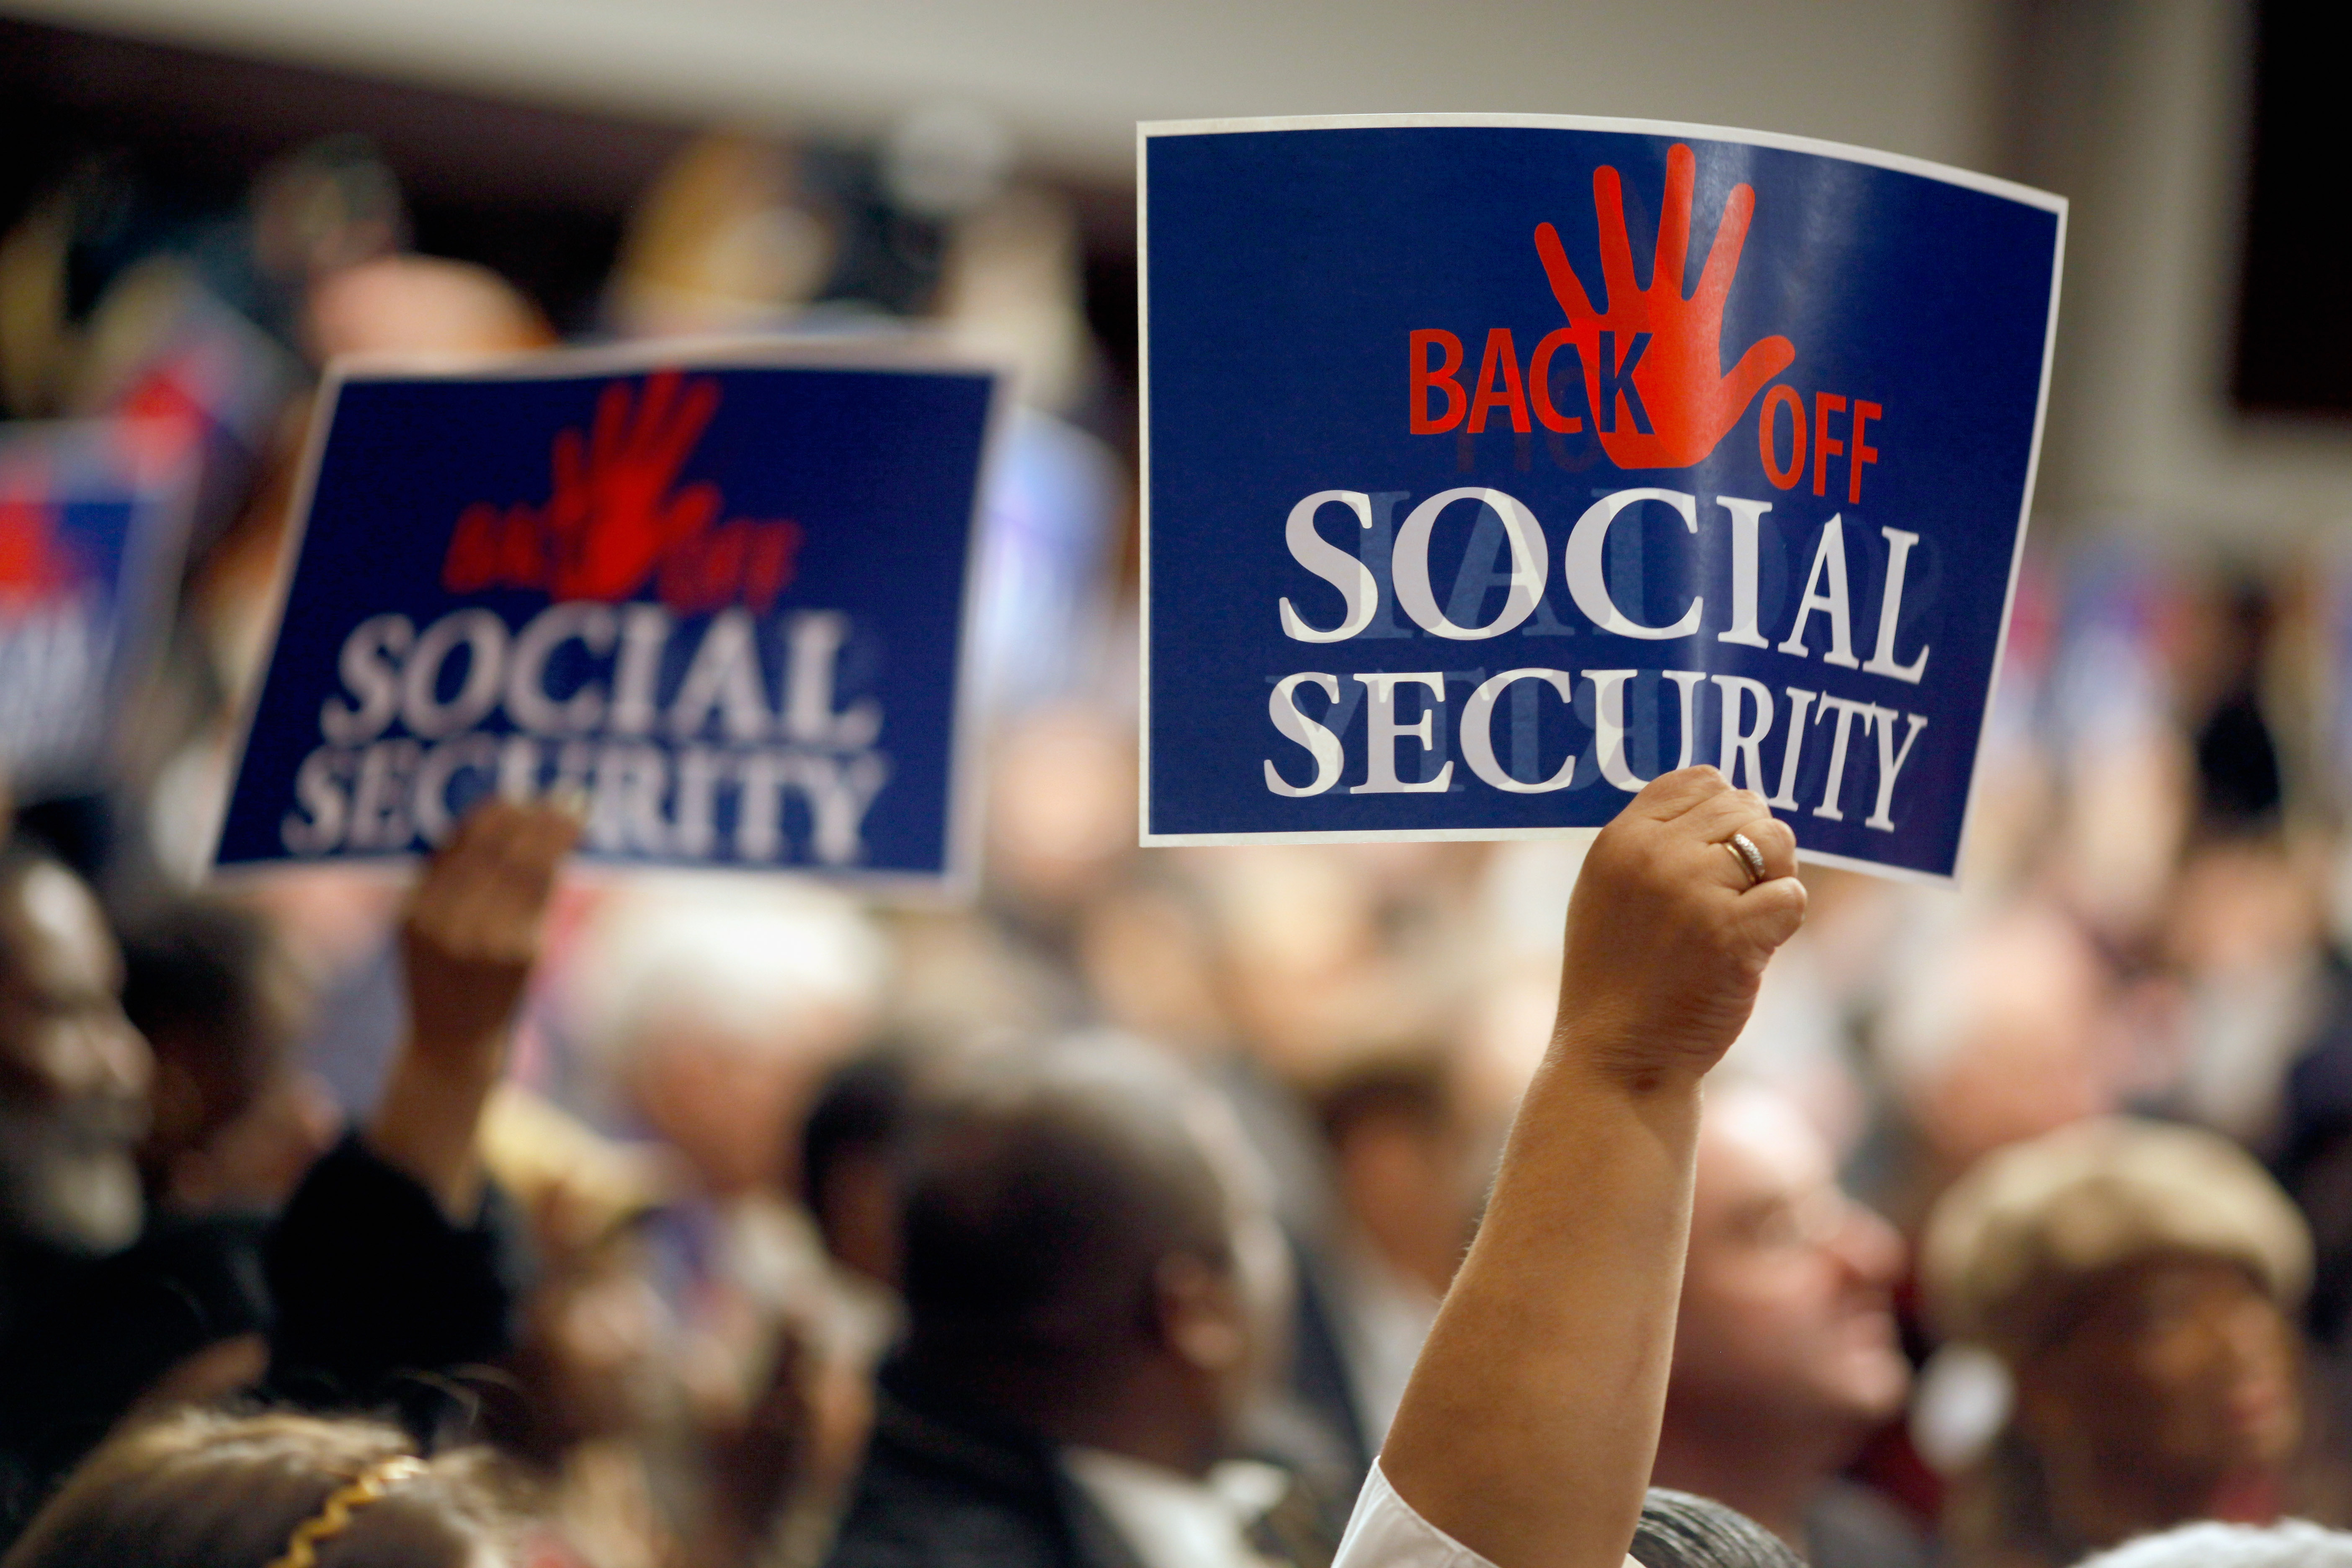 How would you fix Social Security's big problems? CBS News